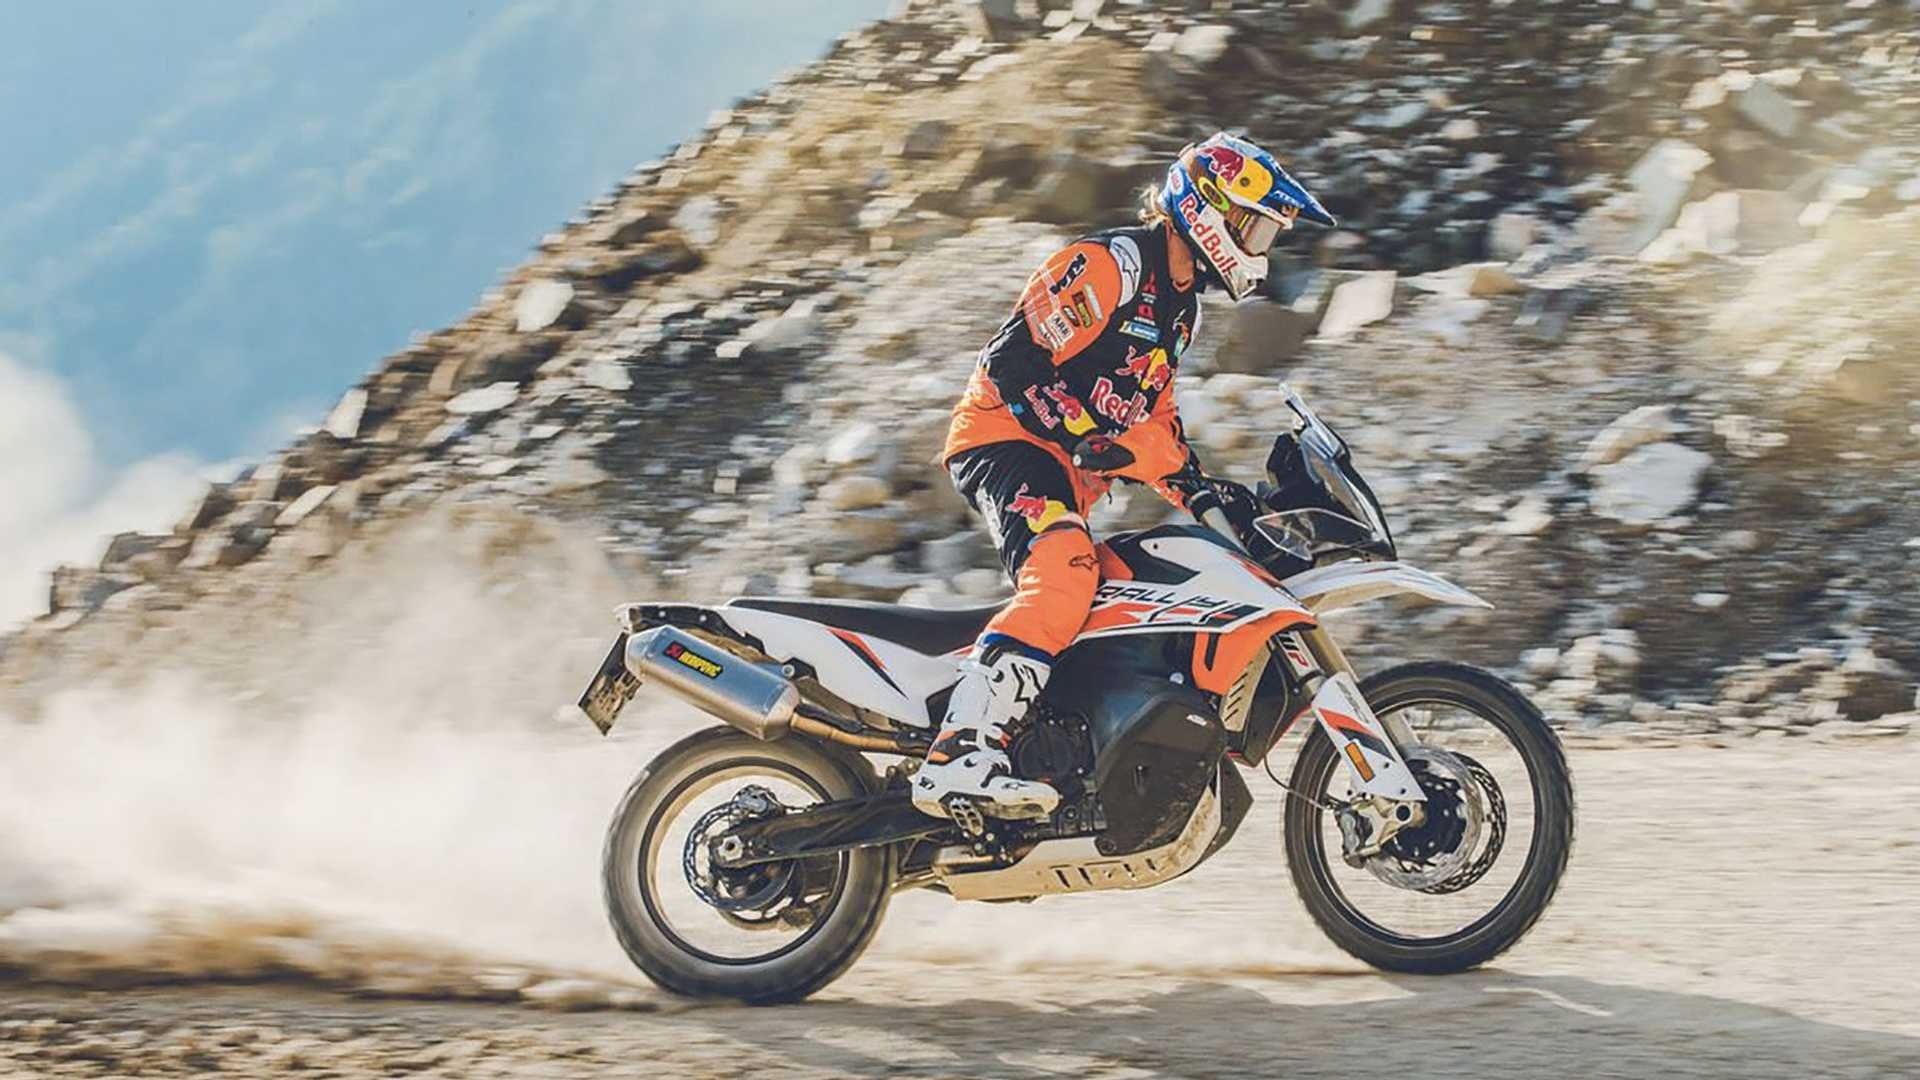 KTM 890 Adventure, R and R Rally editions, Exclusive 2021 photoshoot, Adventure-ready bikes, 1920x1080 Full HD Desktop